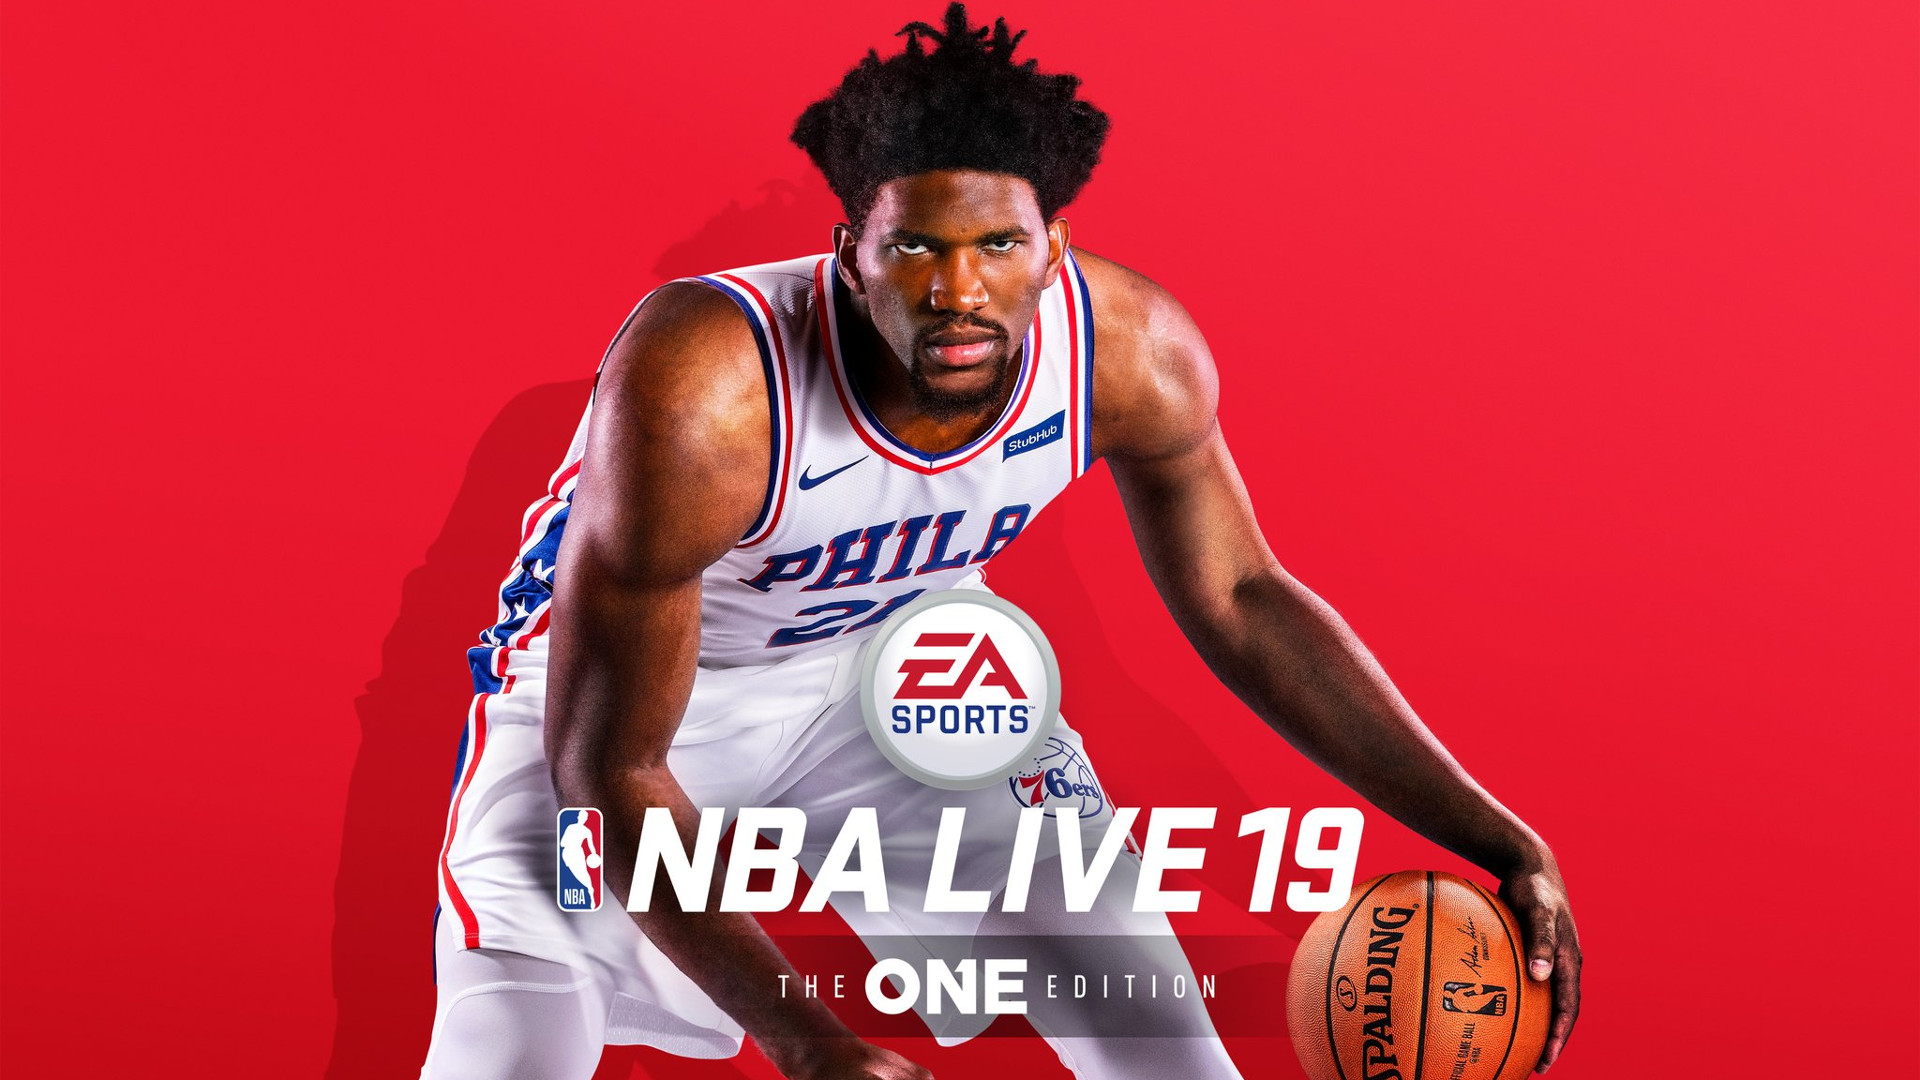 Demo for NBA Live 19 available now pastapadre